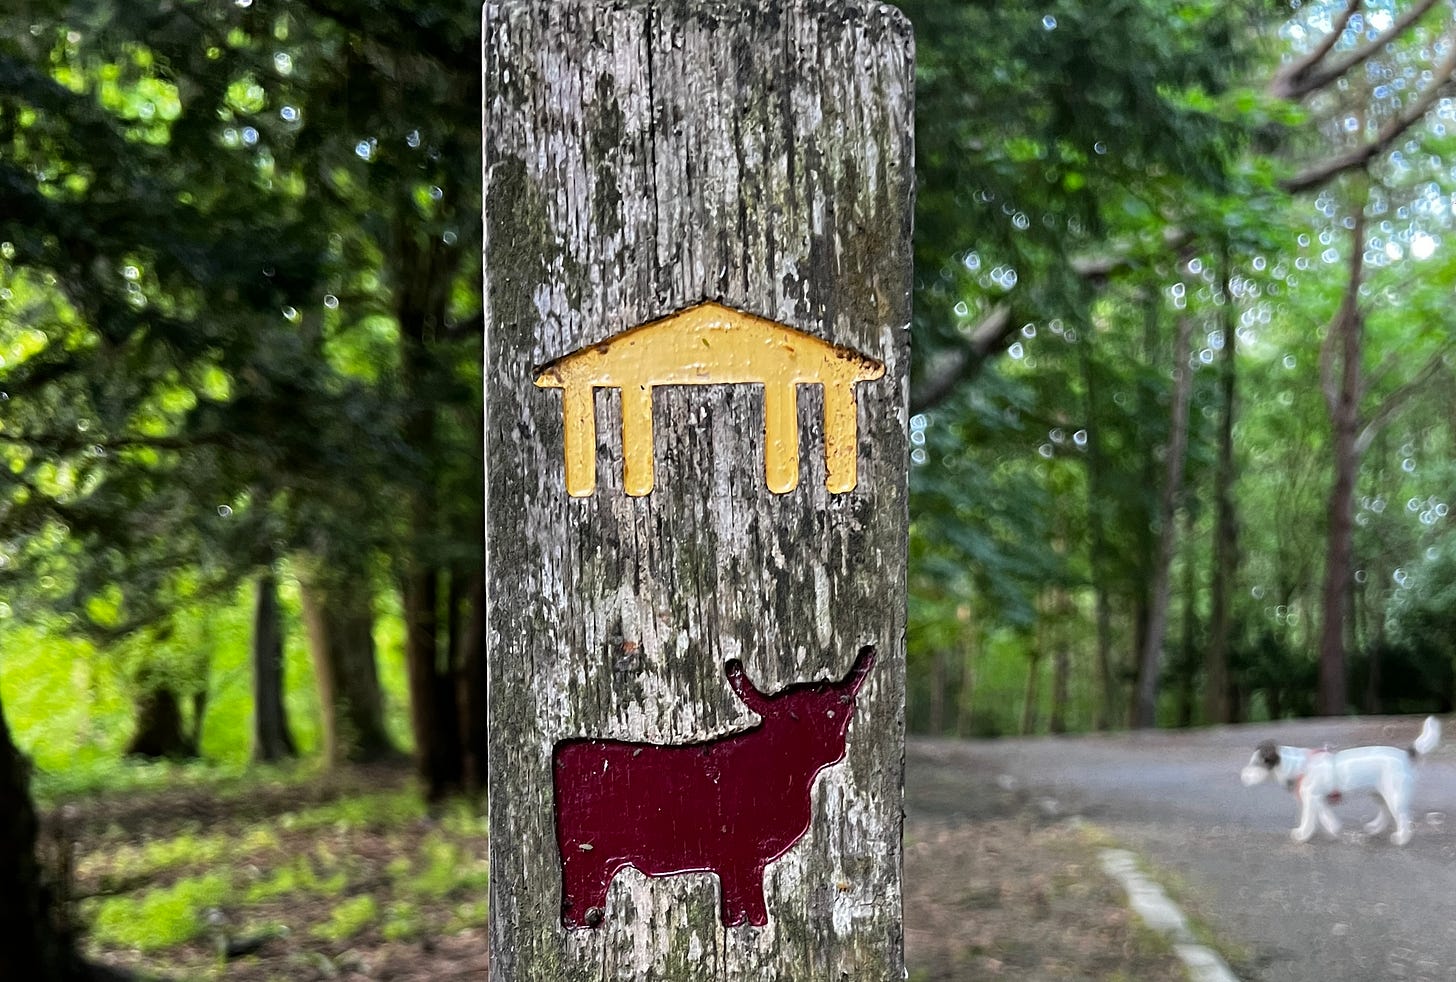 Post with two icons. One of a building with columns, the other of a highland cow. A blurred Jack Russel in the background to the right of the post looks like it's talking to the cow